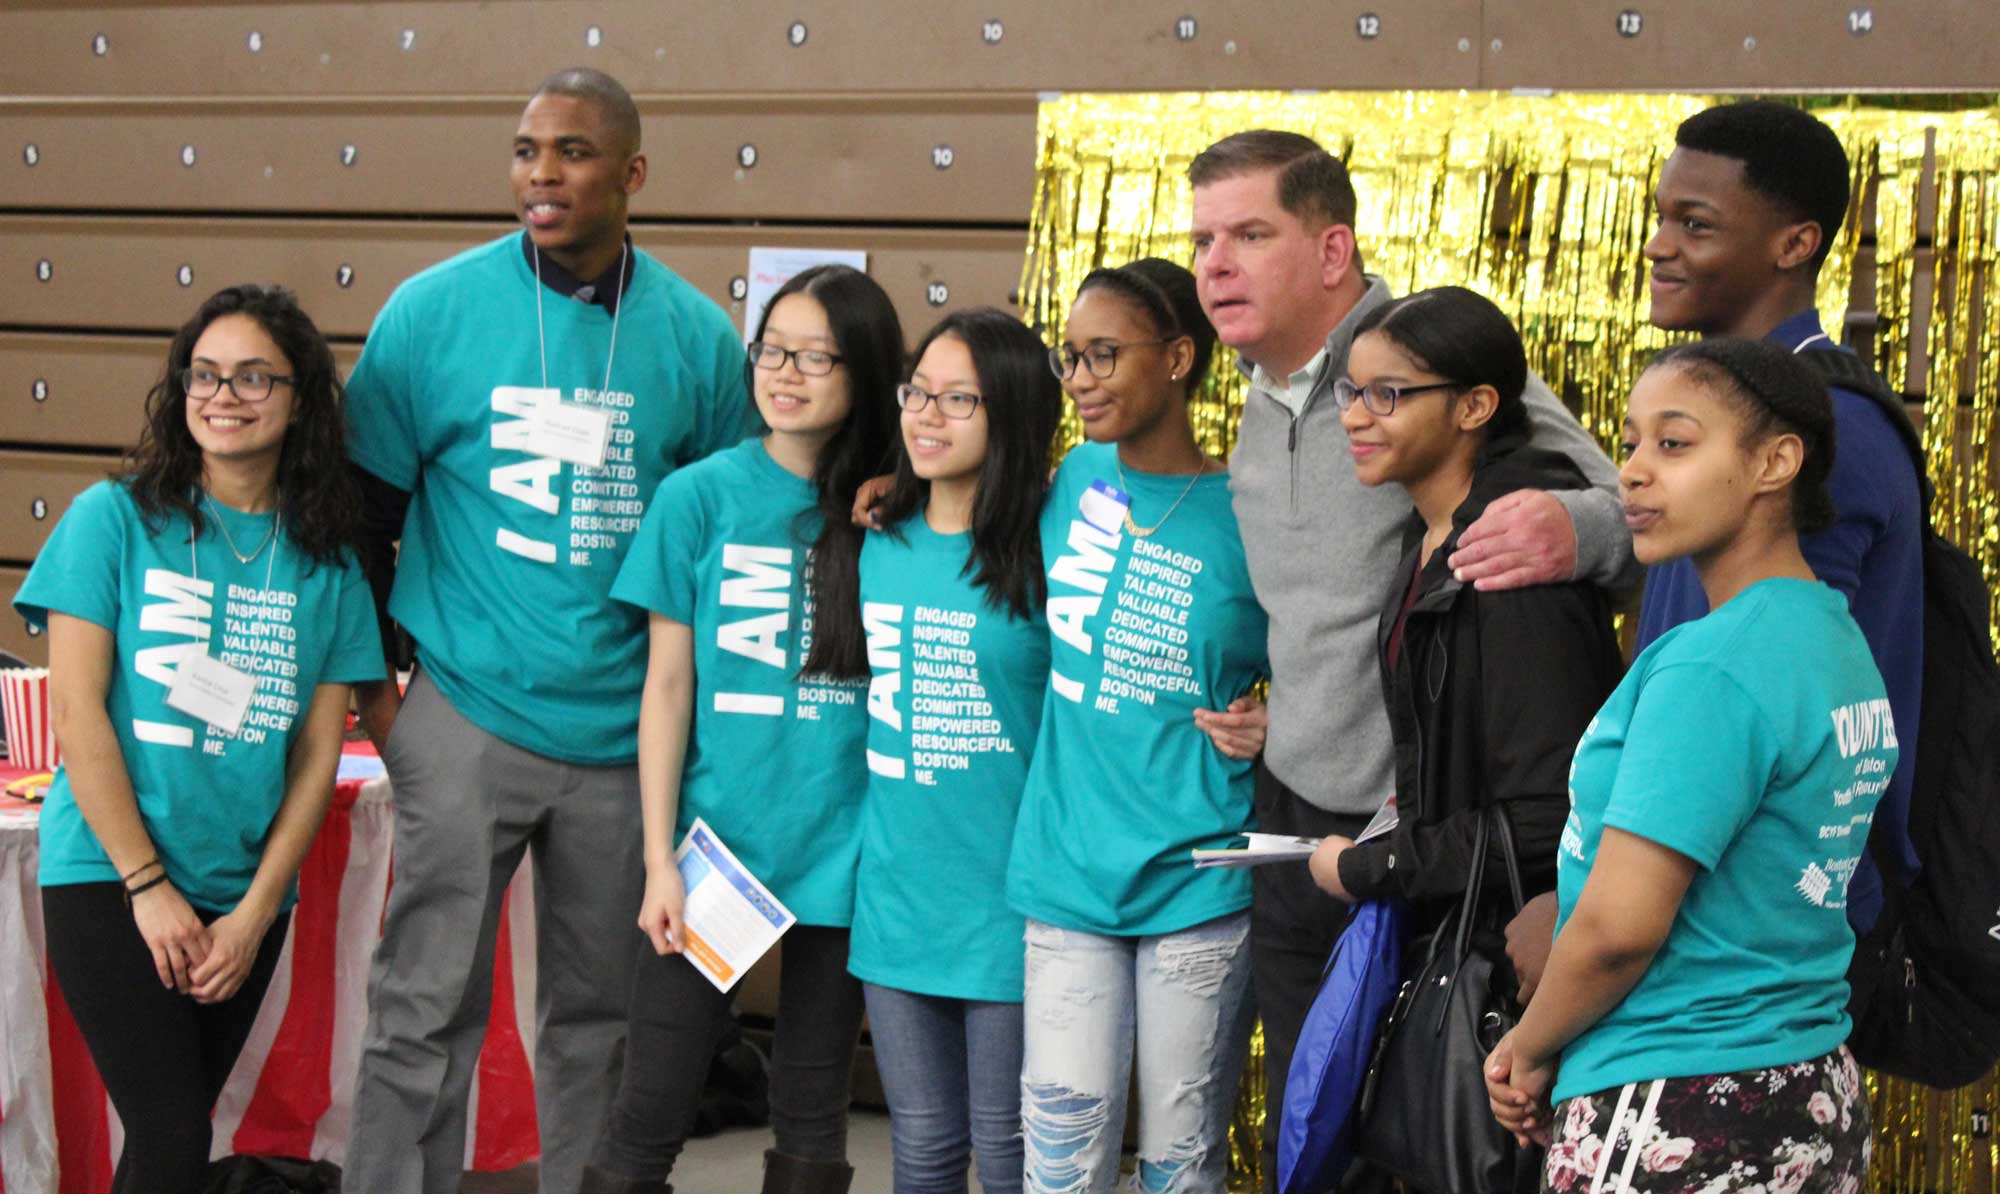 Image for mayor walsh with teens from the summer jobs event